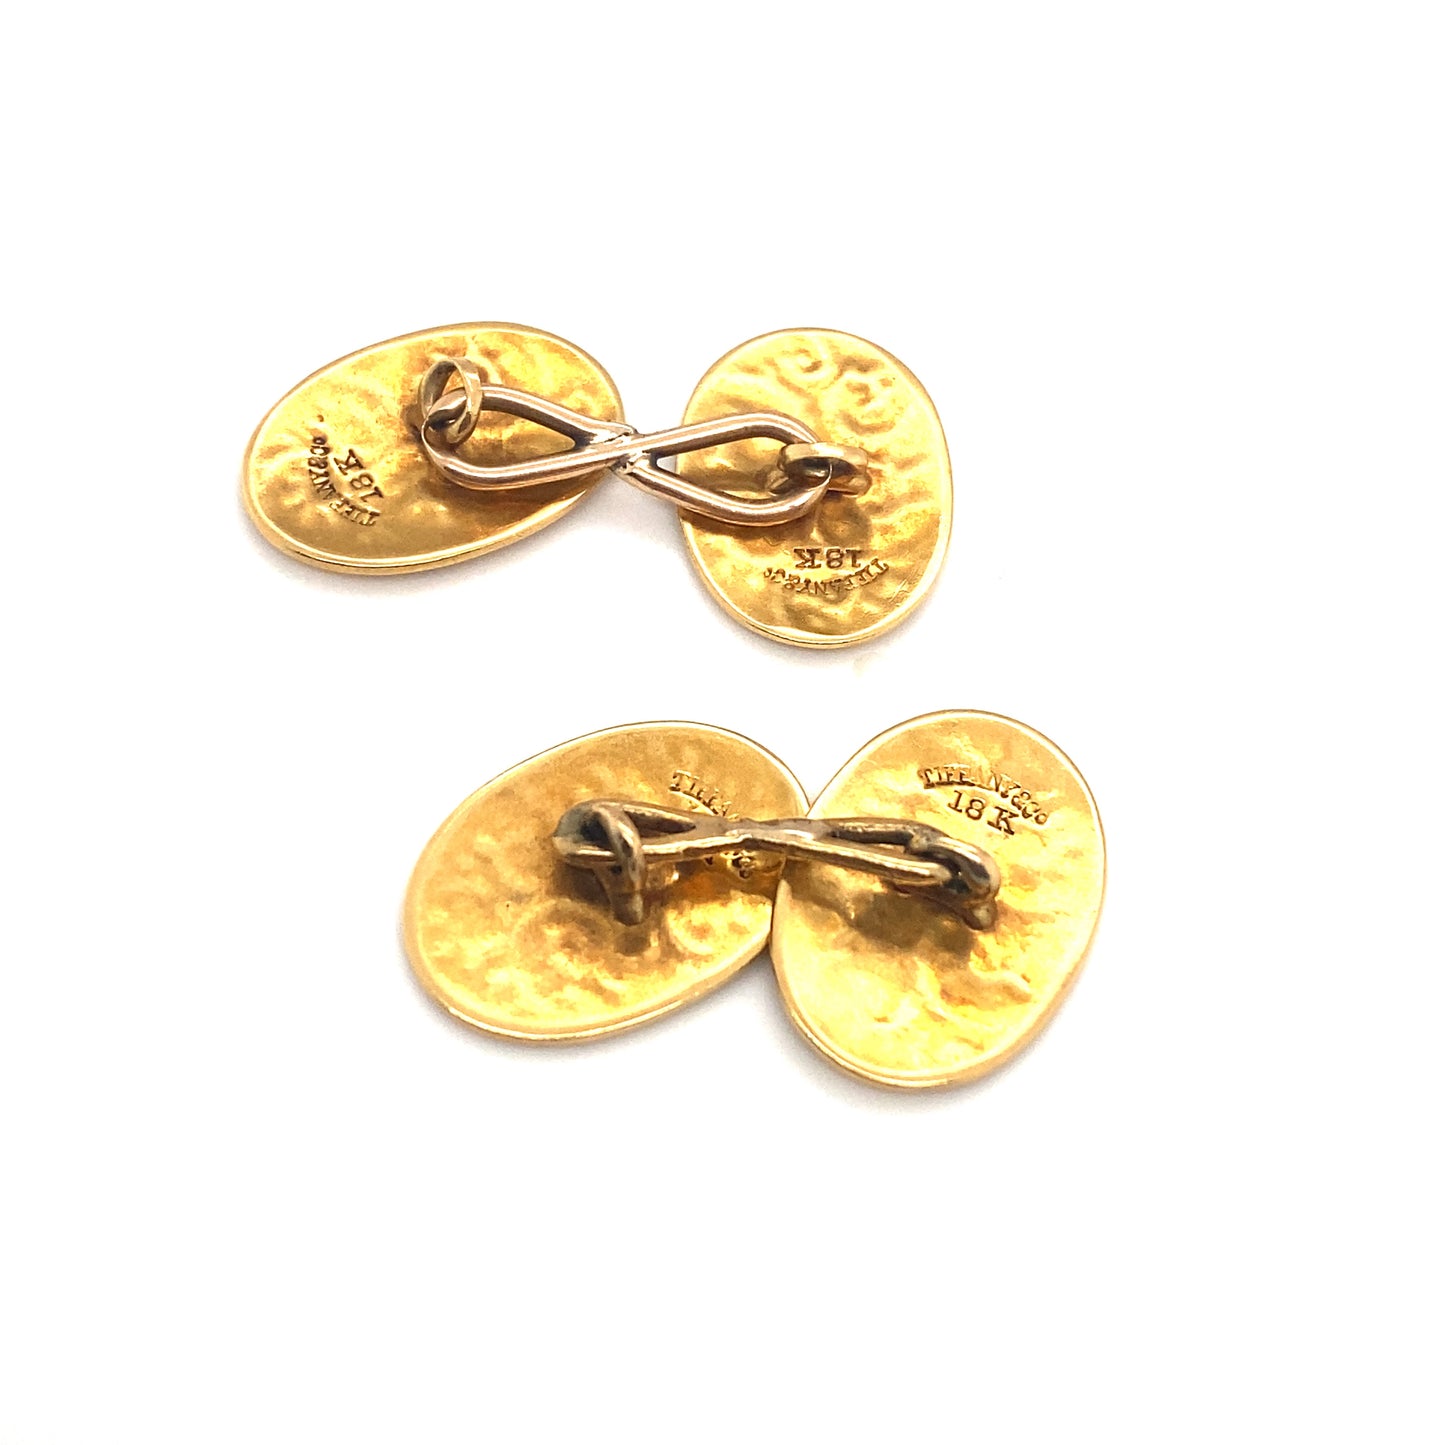 Circa 1890s Tiffany & Co. Etched Cufflinks in 18K Gold